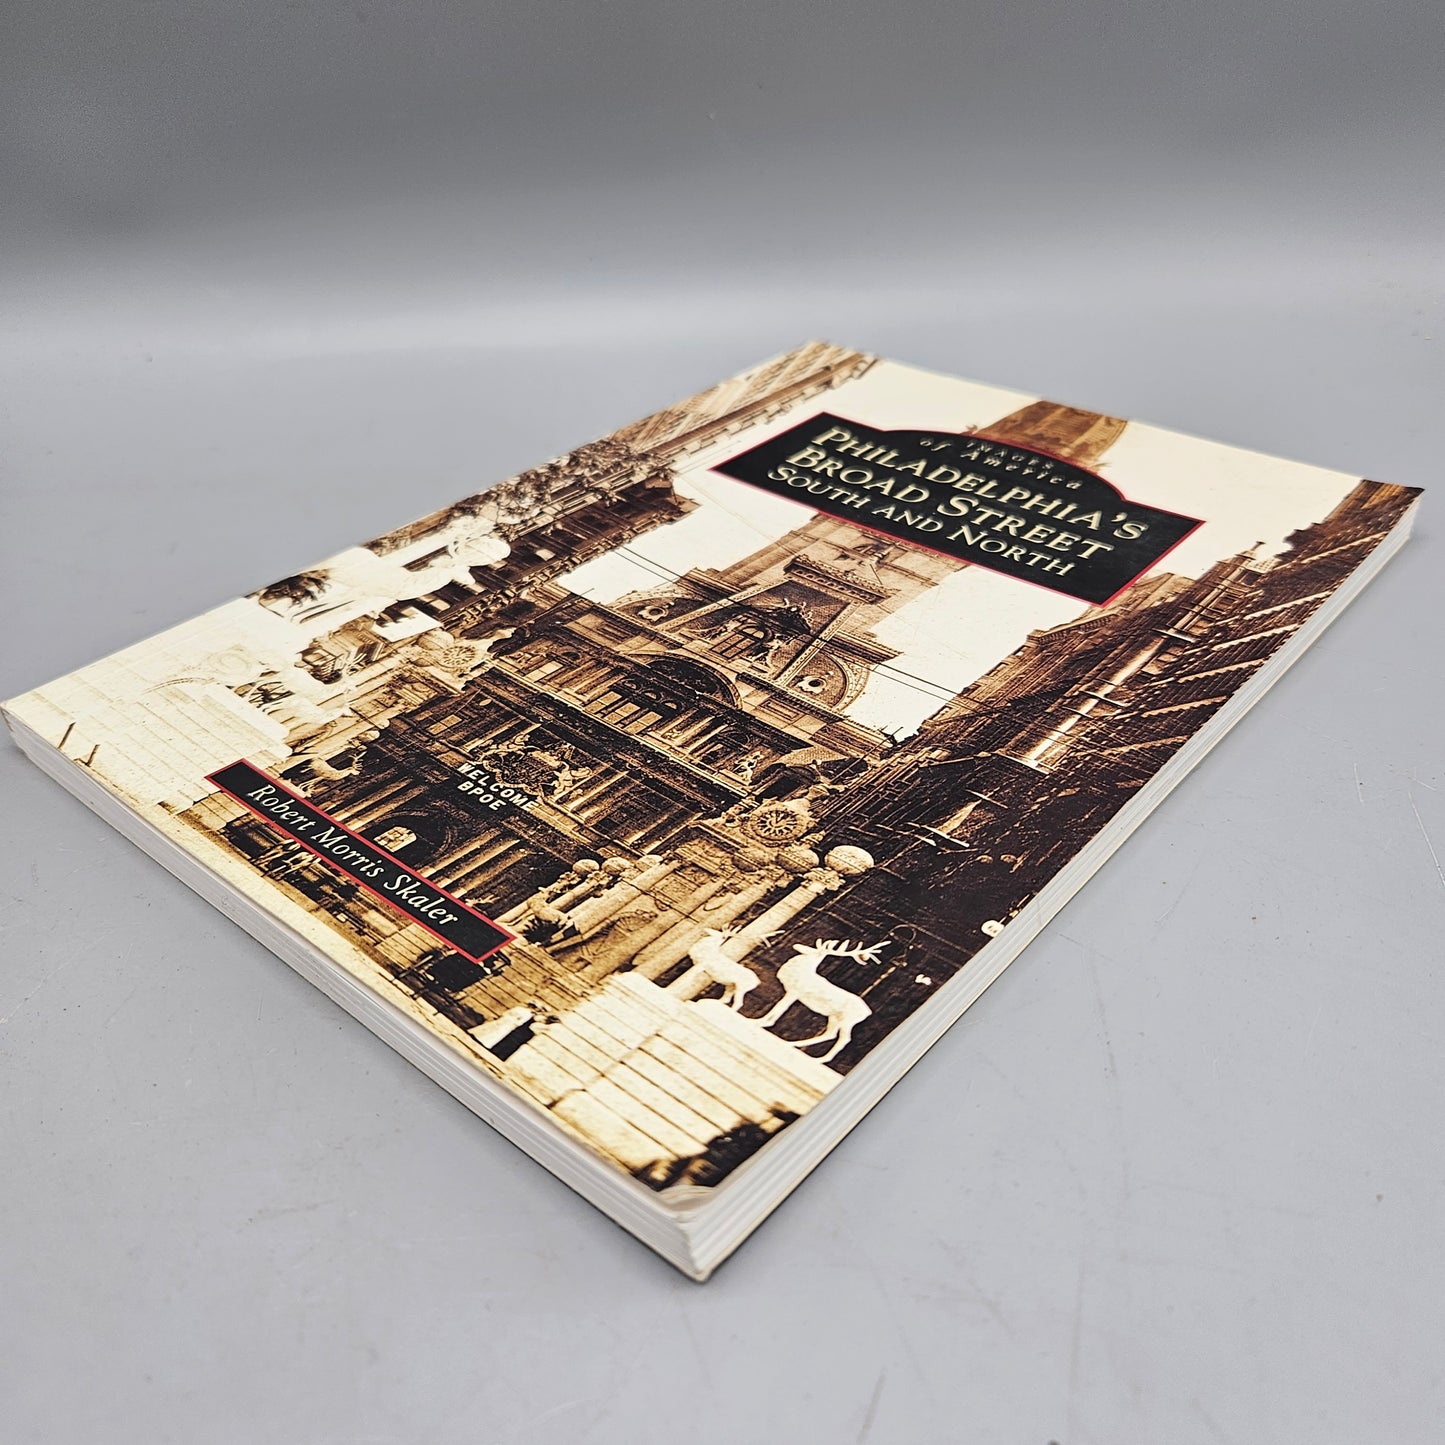 Book: Images of America Philadelphia's Broad Street South & North